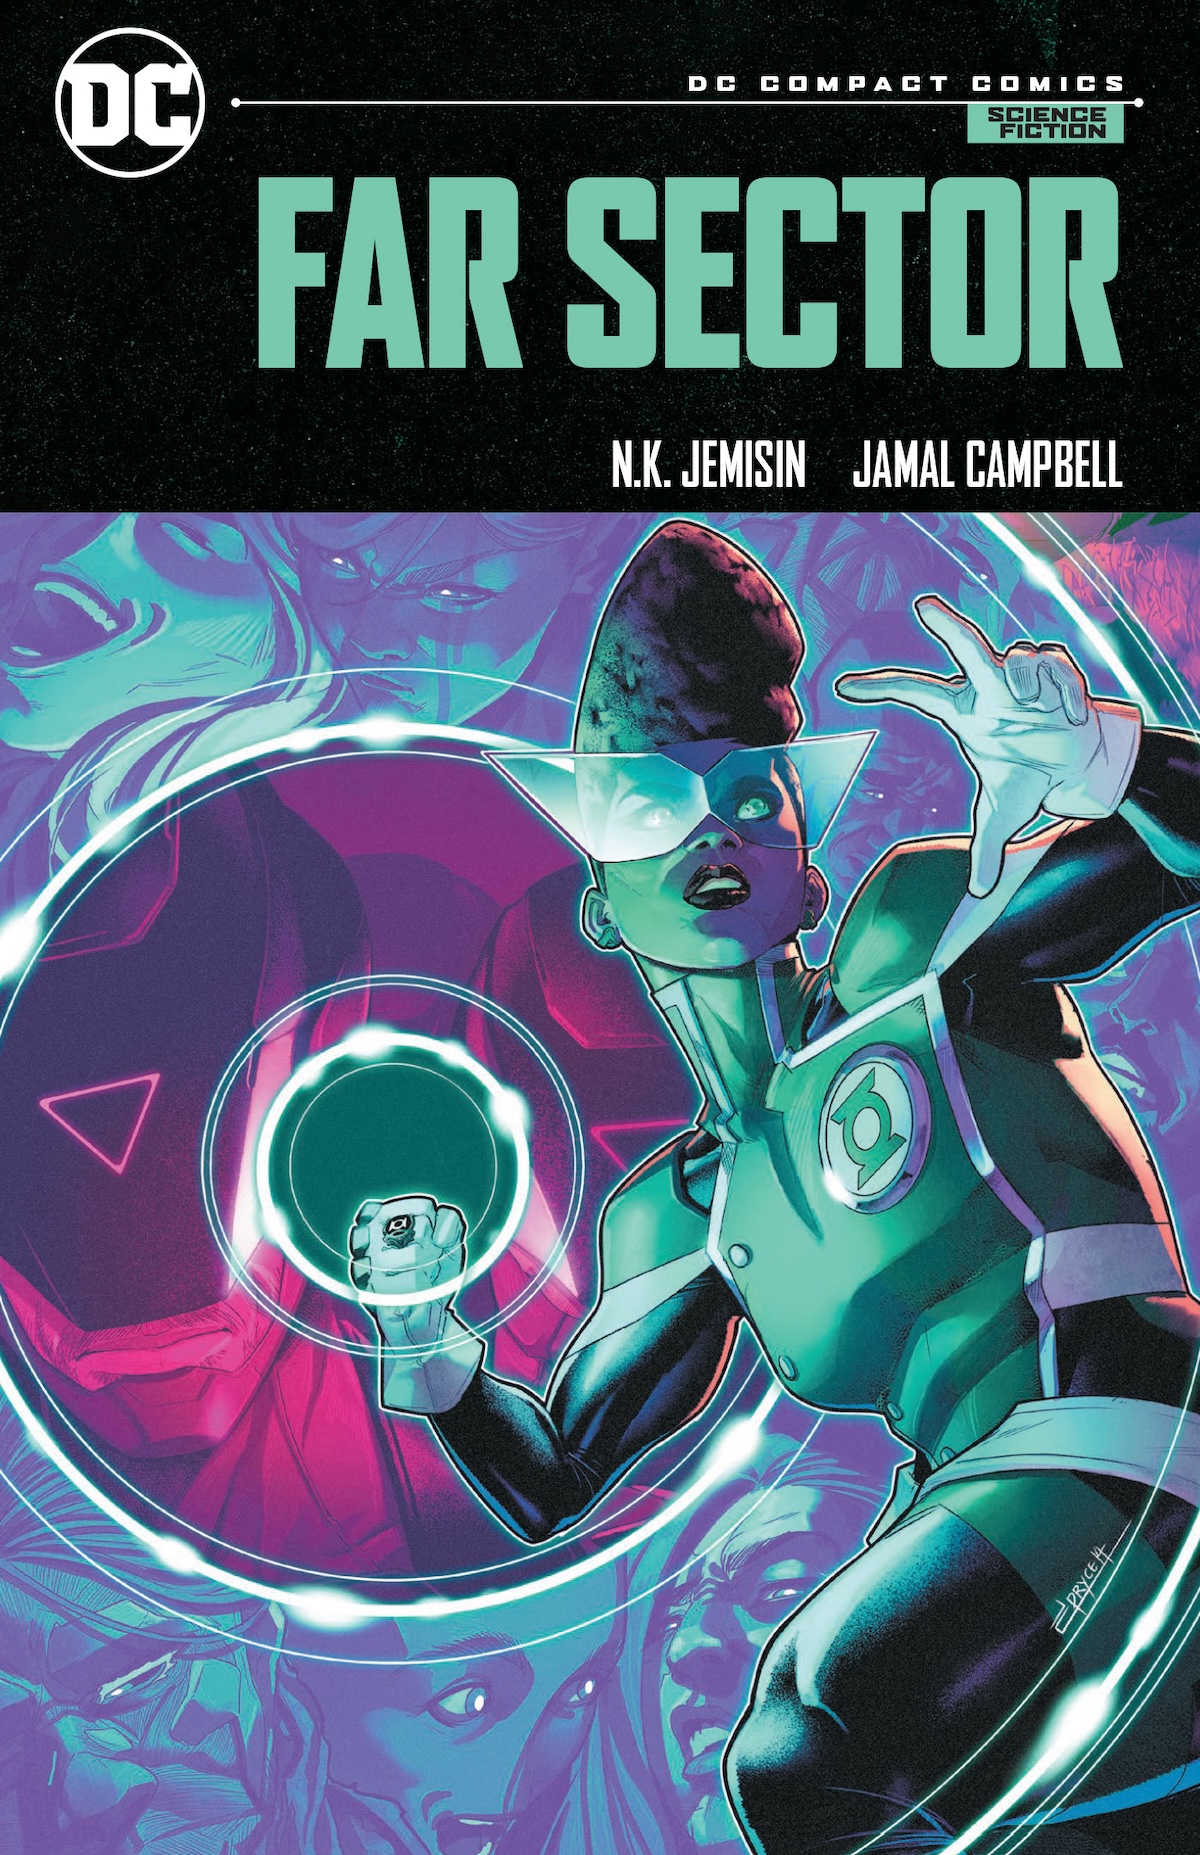 Far Sector by N.K. Jemisin and Jamal Campbell cover for DC Compact Comics 